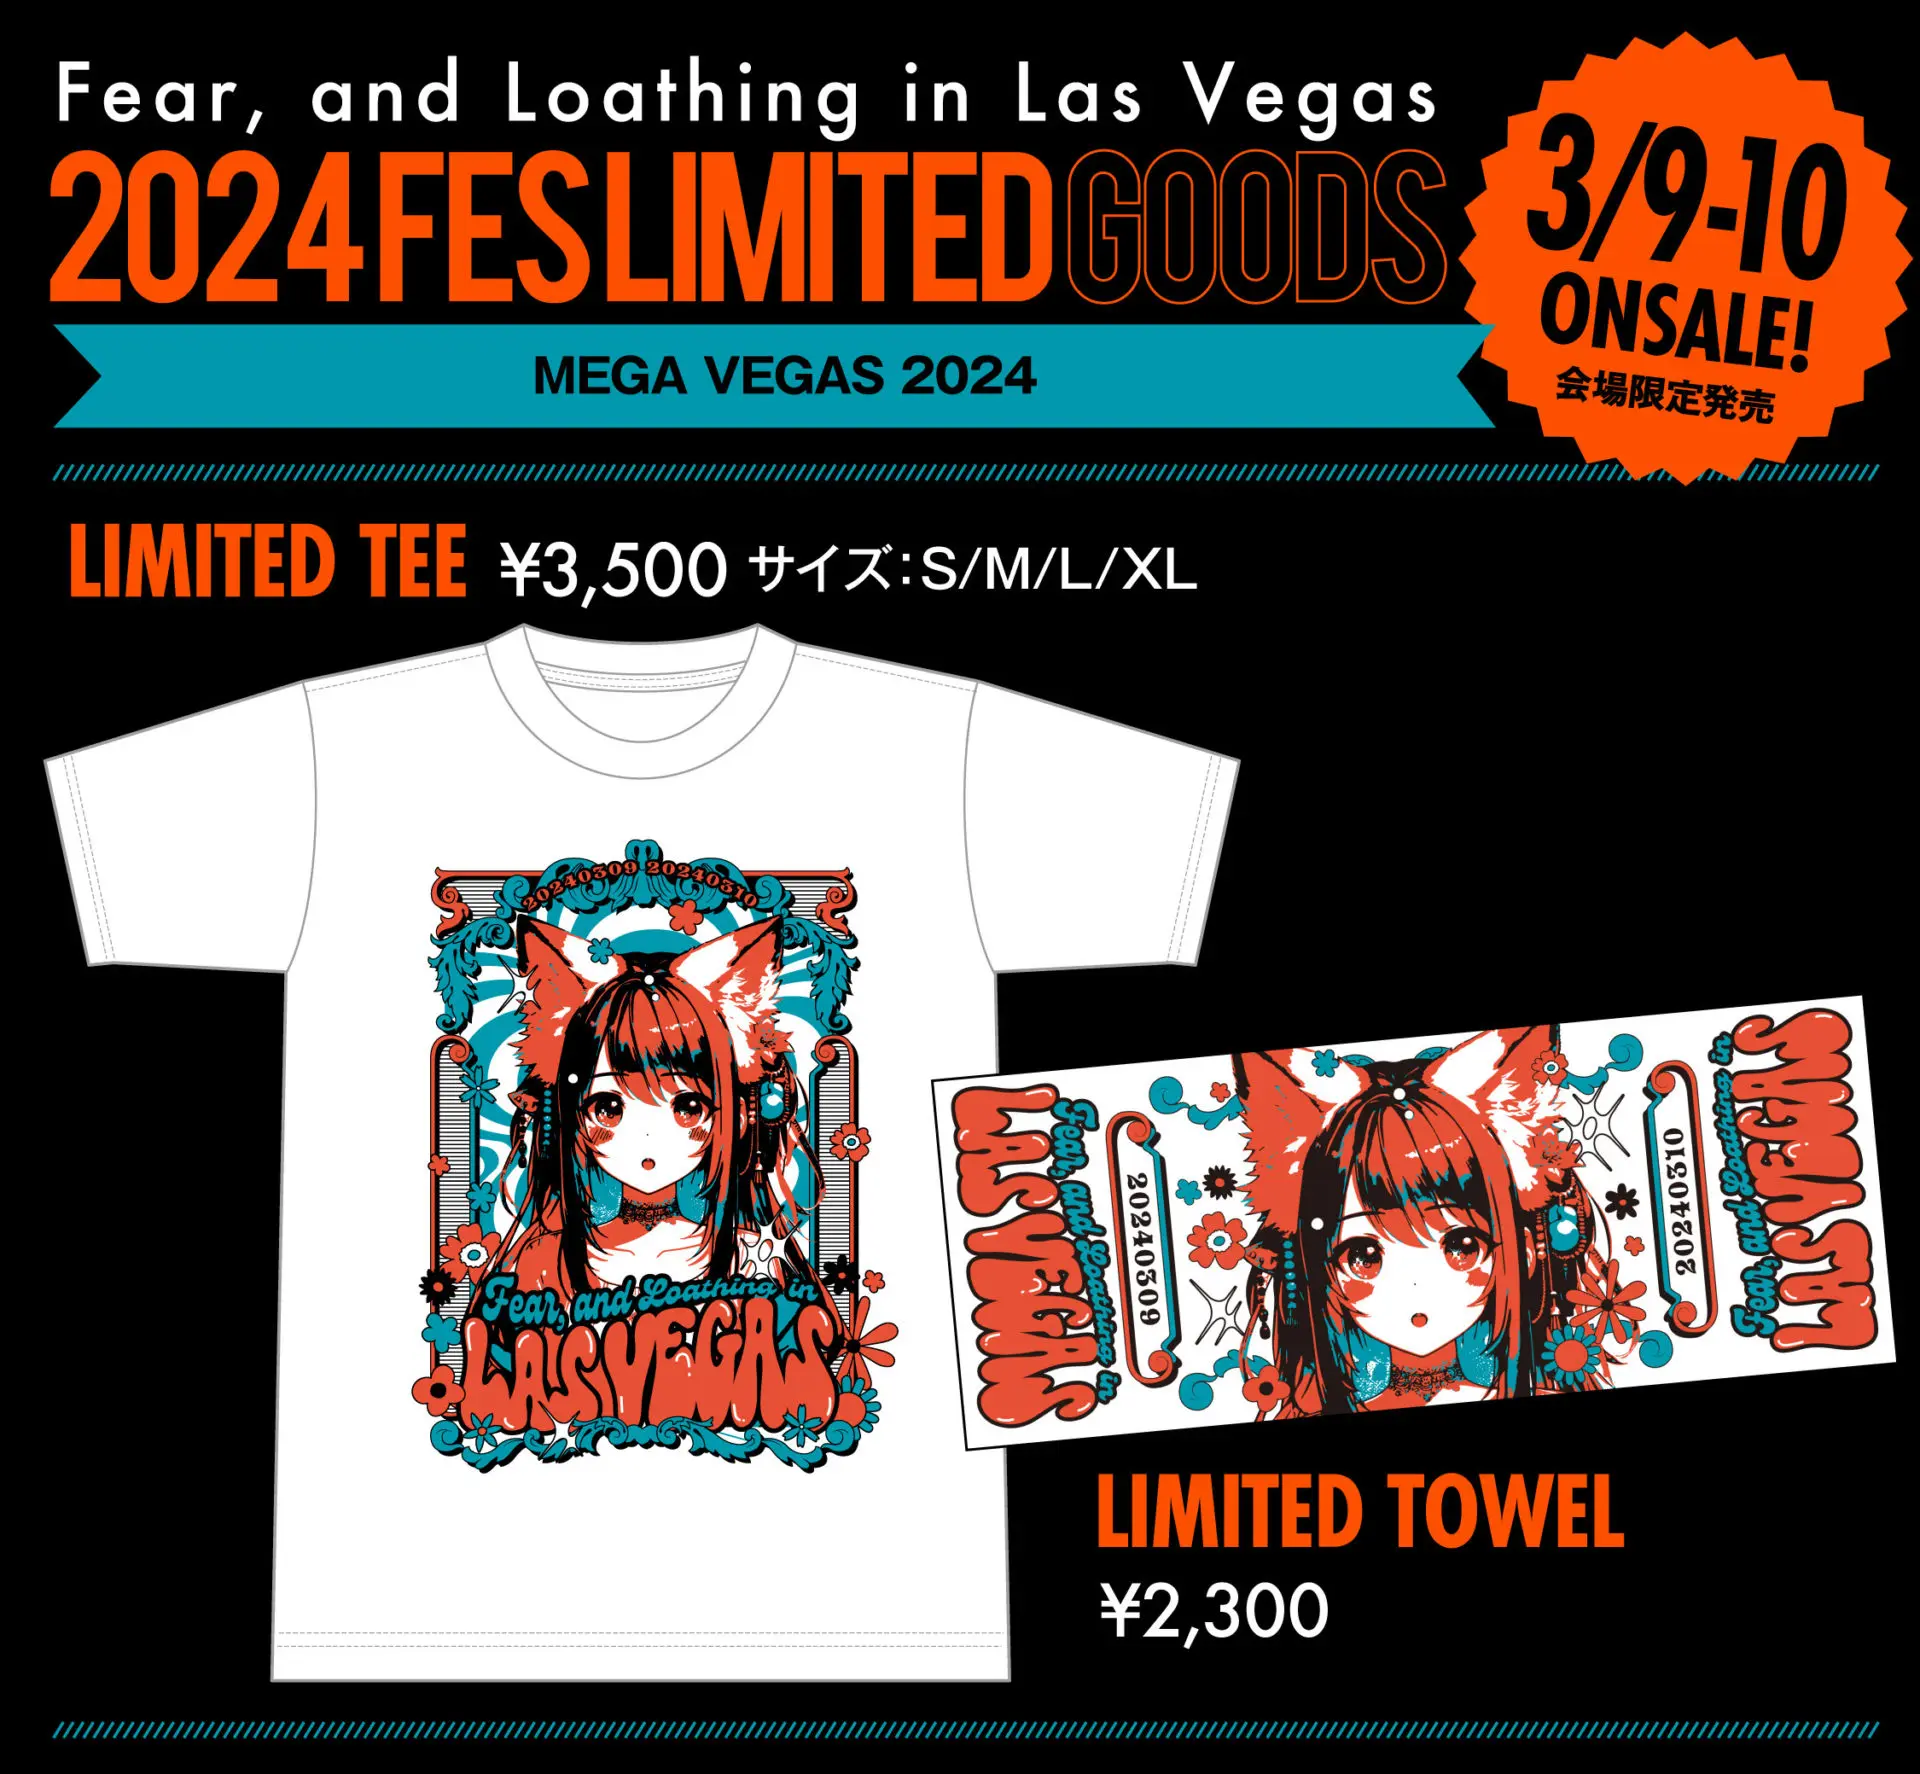 MEGA VEGAS 2024 限定グッズ | Fear, and Loathing in Las Vegas